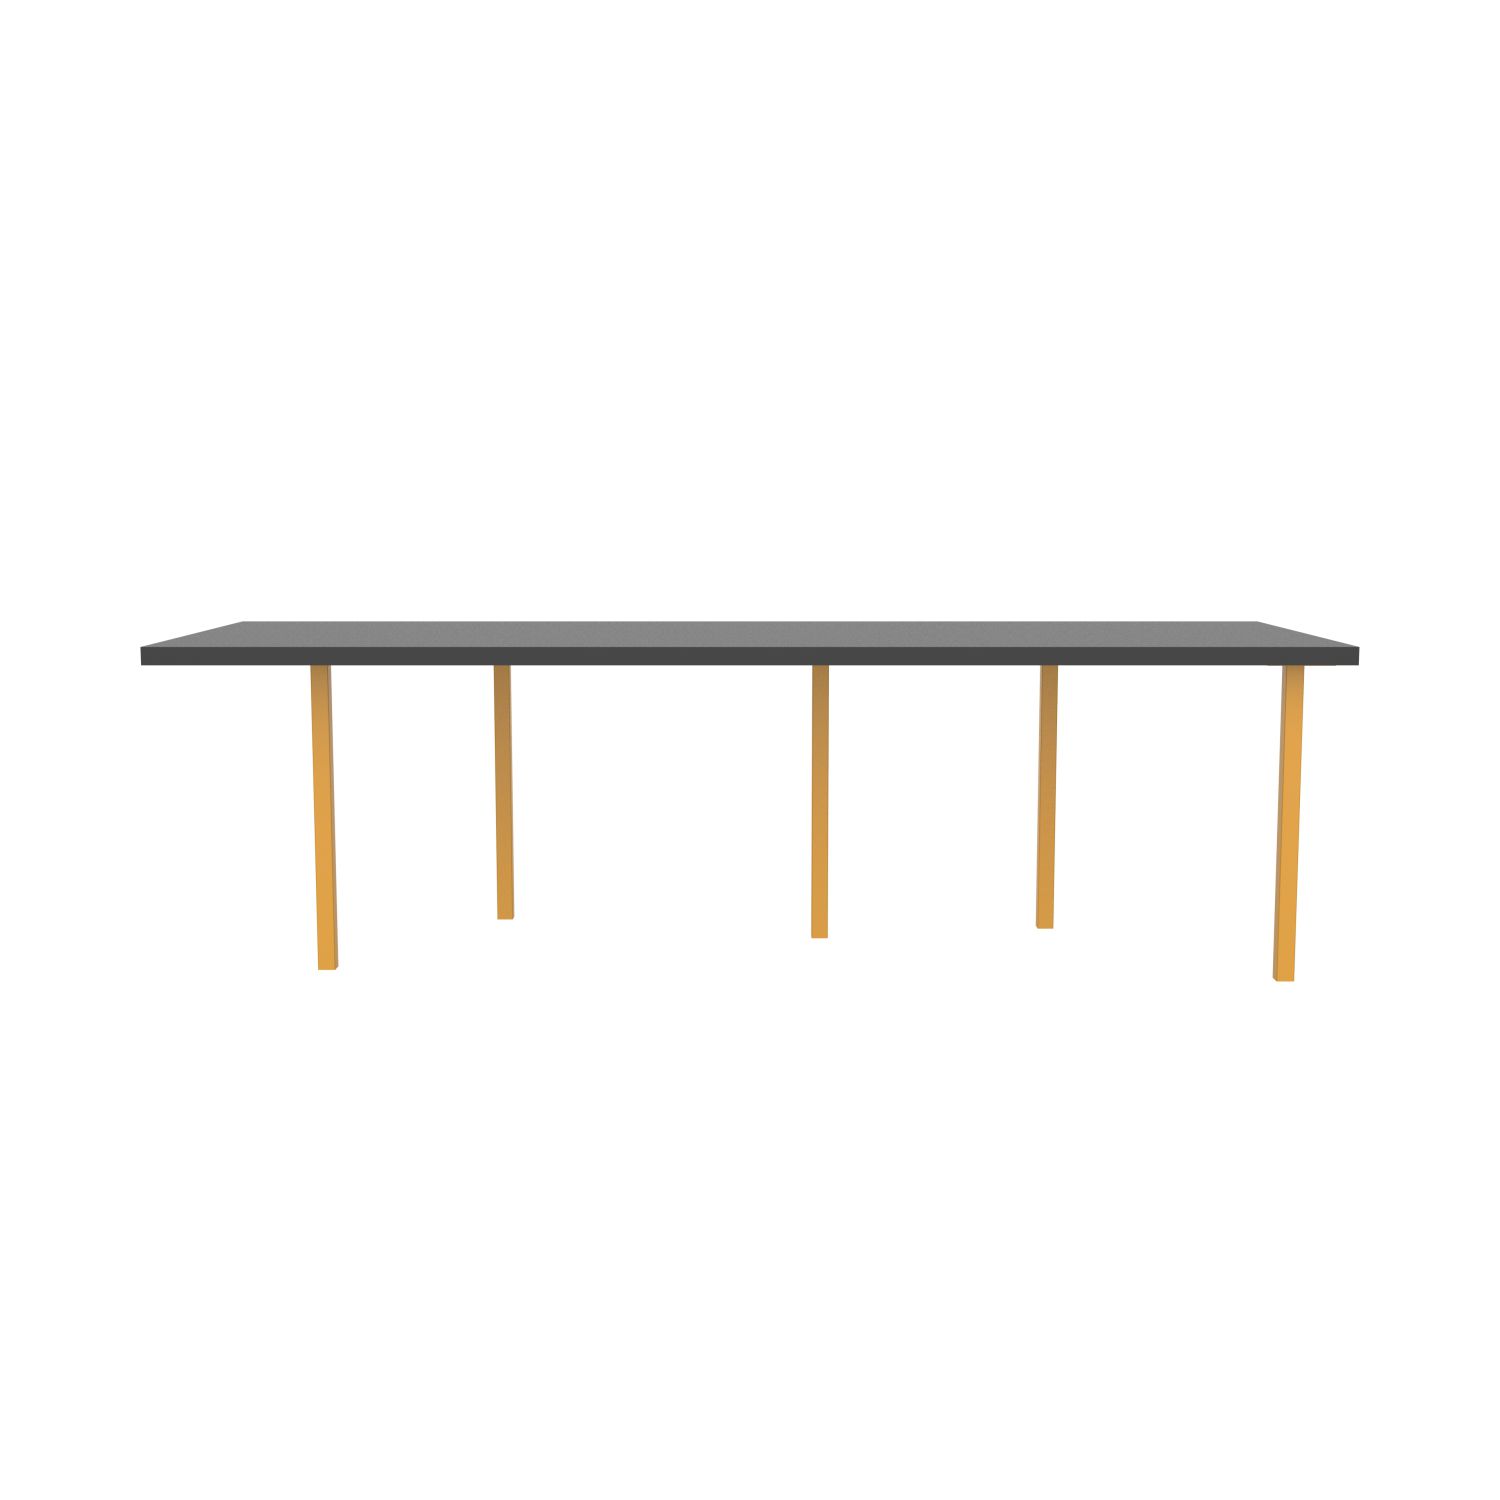 lensvelt bbrand table five fixed heigt 915x264 hpl black 50 mm price level 1 yellow ral1004